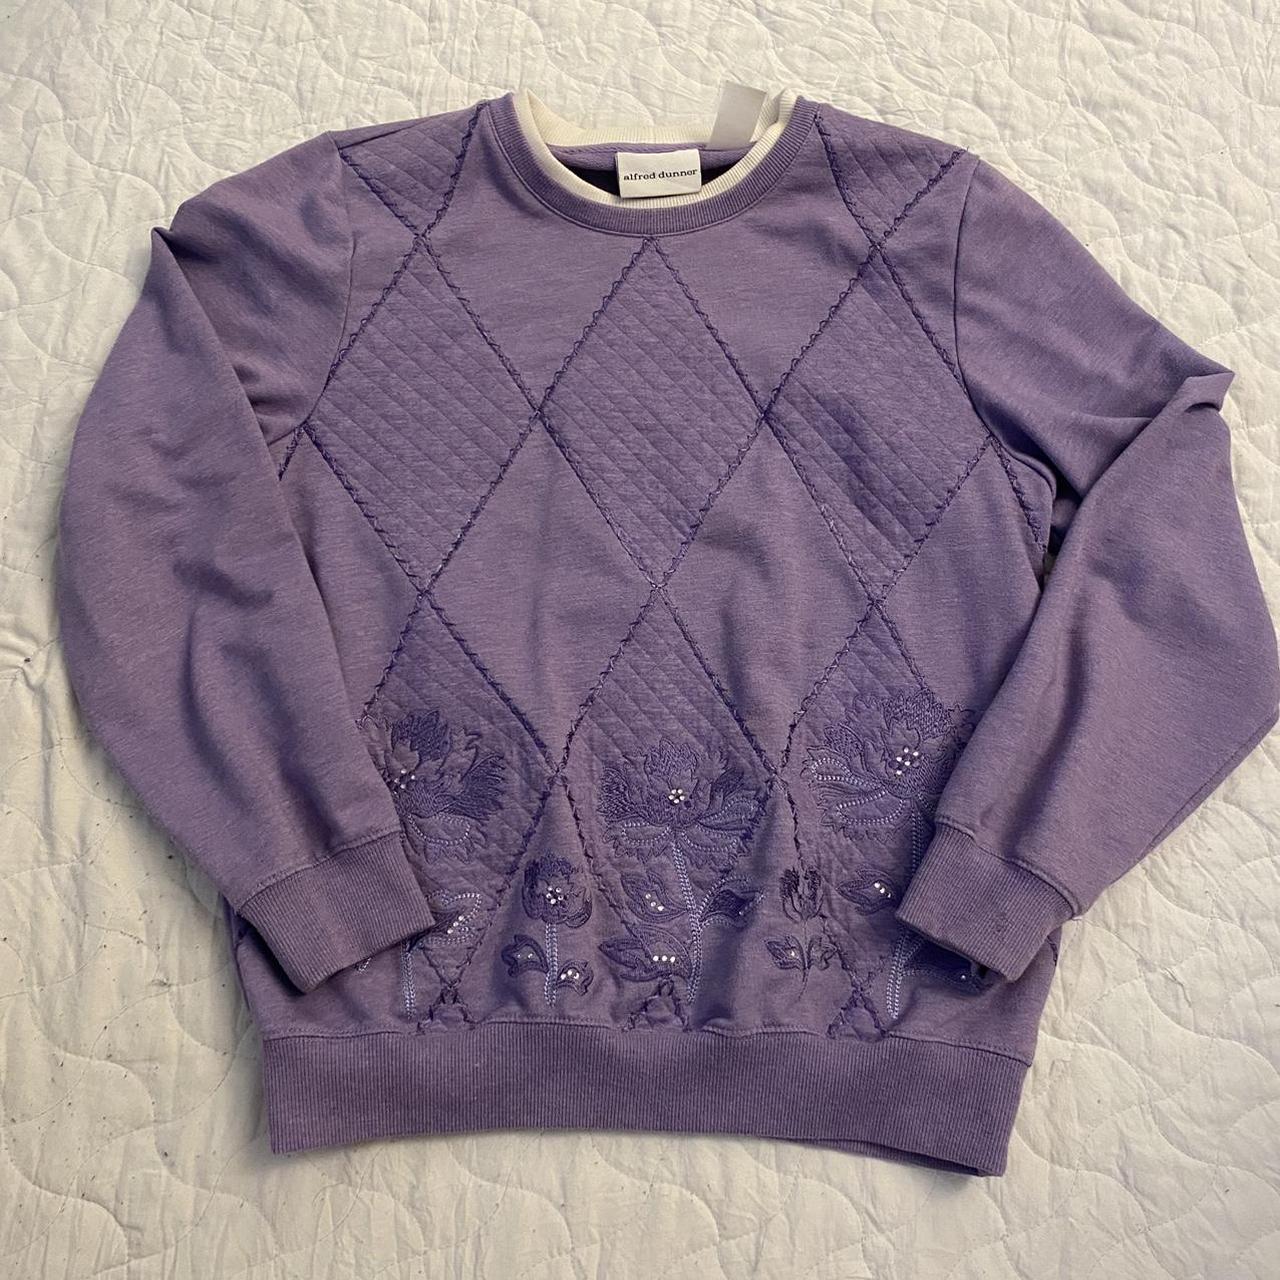 purple embroidered sweater alfred dunner size s - Depop